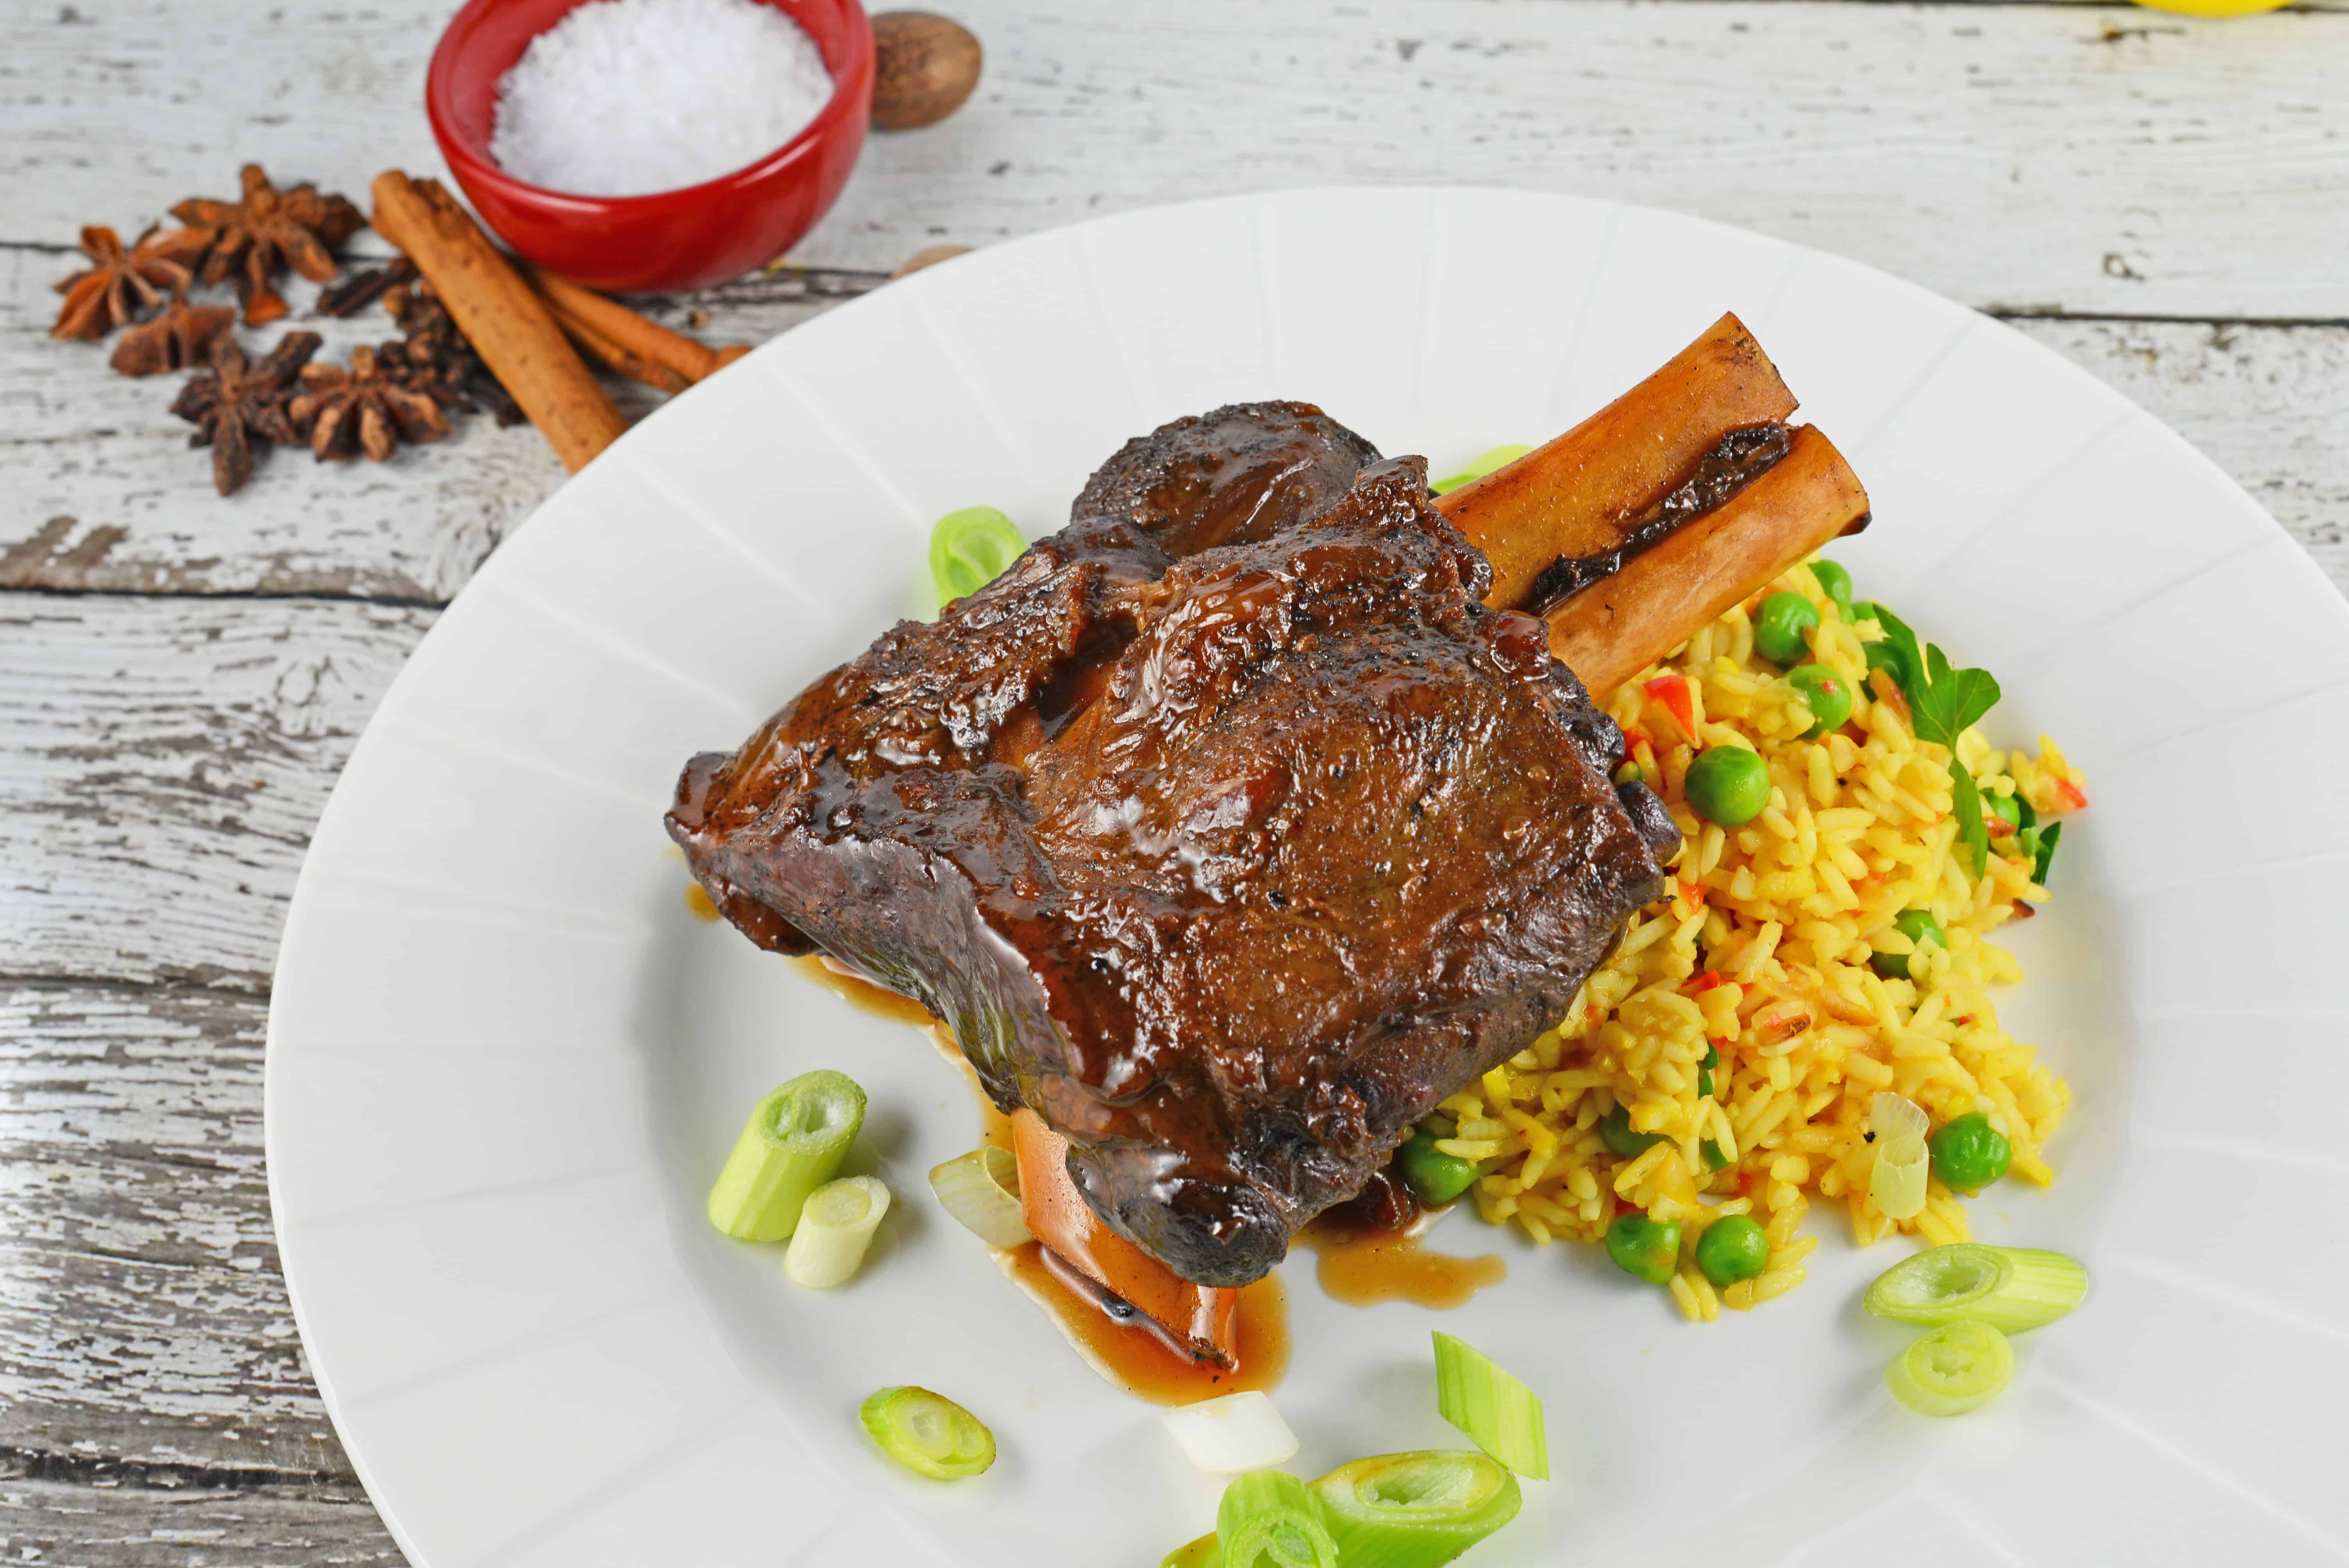 Spiced Boar Shank Recipe- a sophisticated and exotic meal, ideal for special occasions and dinner parties. Lean and healthy with loads of rich flavor. www.savoryexperiments.com